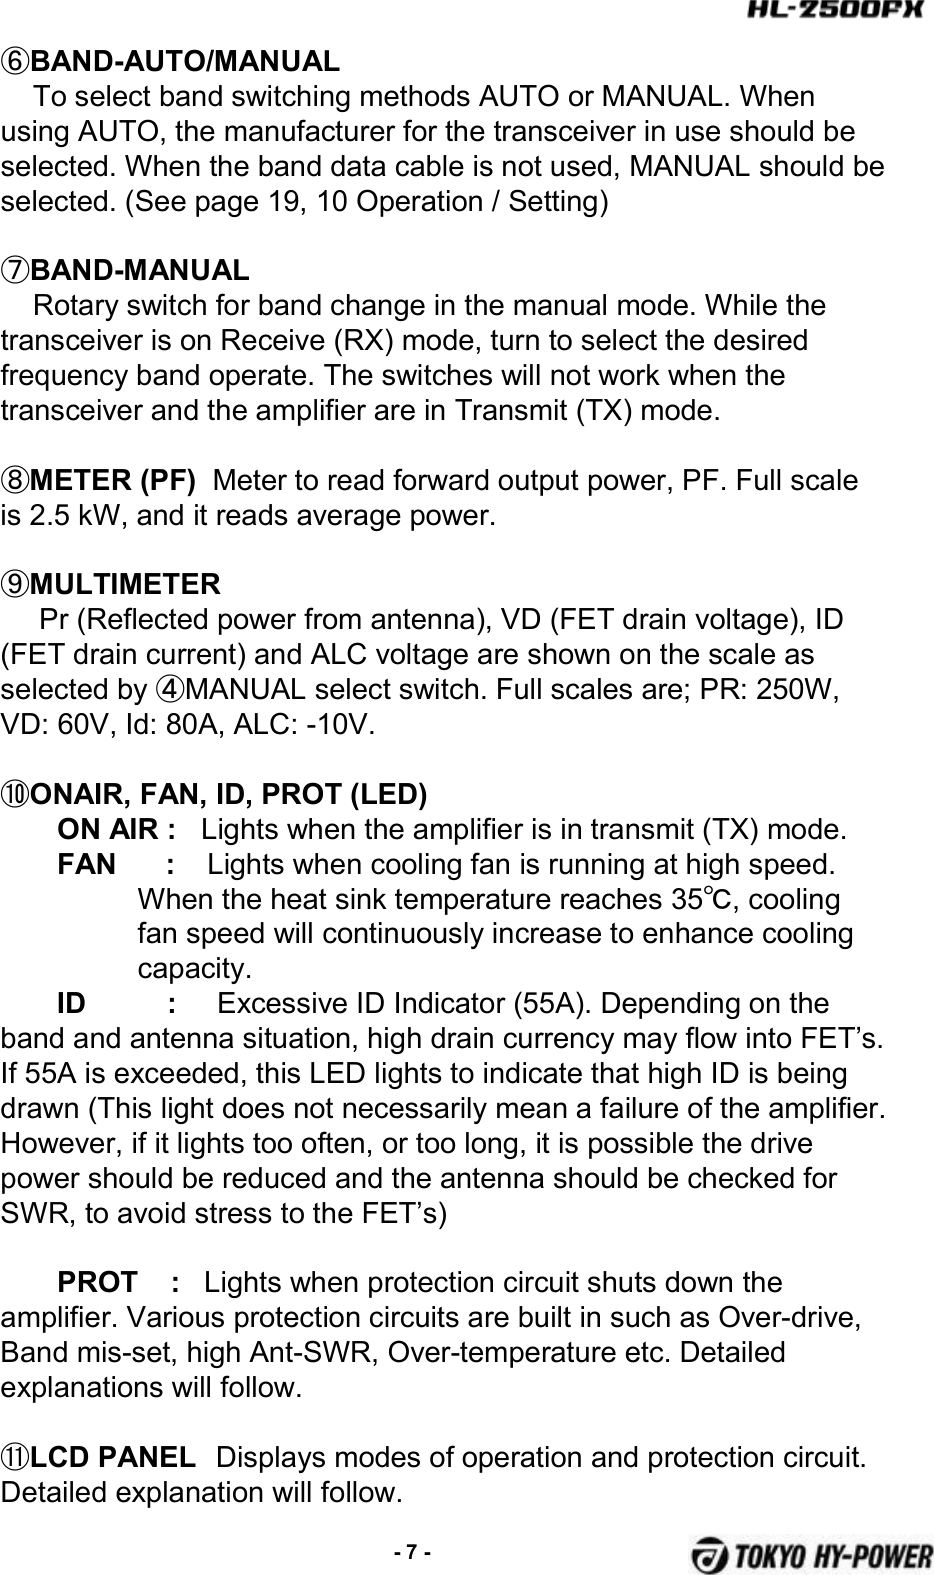 ⑥BAND-AUTO/MANUAL  To select band switching methods AUTO or MANUAL. When using AUTO, the manufacturer for the transceiver in use should be selected. When the band data cable is not used, MANUAL should beselected. (See page 19, 10 Operation / Setting)⑦BAND-MANUAL  Rotary switch for band change in the manual mode. While the transceiver is on Receive (RX) mode, turn to select the desired frequency band operate. The switches will not work when the transceiver and the amplifier are in Transmit (TX) mode.⑧METER (PF) Meter to read forward output power, PF. Full scale is 2.5 kW, and it reads average power.⑨MULTIMETER Pr (Reflected power from antenna), VD (FET drain voltage), ID (FET drain current) and ALC voltage are shown on the scale as selected by ④MANUAL select switch. Full scales are; PR: 250W, VD: 60V, Id: 80A, ALC: -10V.⑩ONAIR, FAN, ID, PROT (LED)ON AIR : Lights when the amplifier is in transmit (TX) mode. FAN      :  Lights when cooling fan is running at high speed.When the heat sink temperature reaches 35℃,cooling fan speed will continuously increase to enhance cooling capacity. ID          : Excessive ID Indicator (55A). Depending on the band and antenna situation, high drain currency may flow into FET’s. If 55A is exceeded, this LED lights to indicate that high ID is being drawn (This light does not necessarily mean a failure of the amplifier. However, if it lights too often, or too long, it is possible the drive power should be reduced and the antenna should be checked for SWR, to avoid stress to the FET’s)PROT    : Lights when protection circuit shuts down the amplifier. Various protection circuits are built in such as Over-drive, Band mis-set, high Ant-SWR, Over-temperature etc. Detailed explanations will follow.⑪LCD PANEL Displays modes of operation and protection circuit. Detailed explanation will follow.-7 -